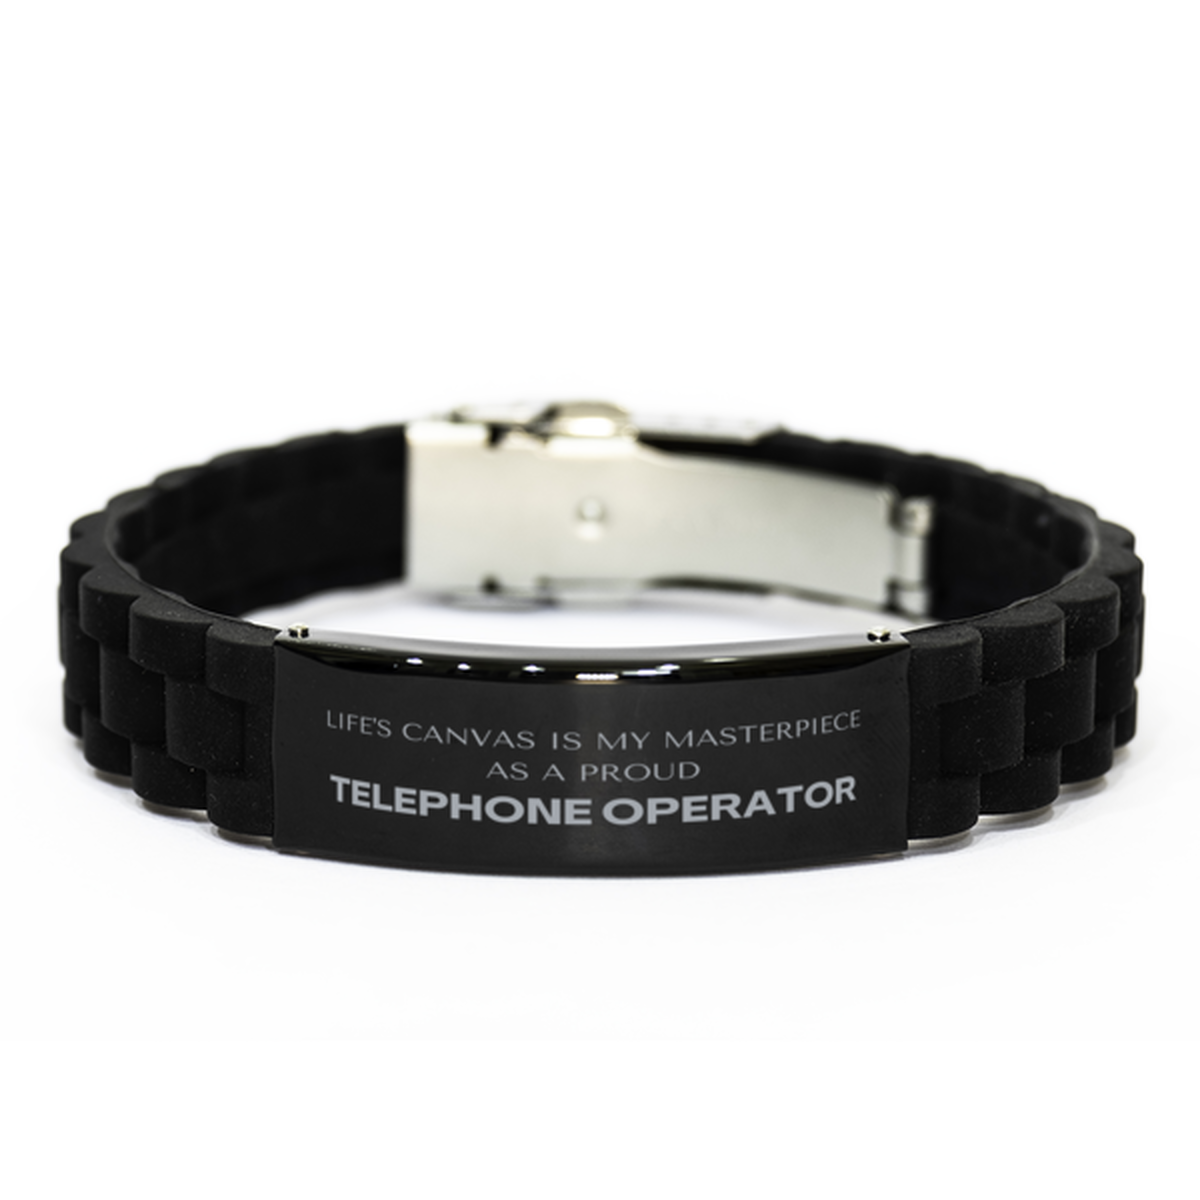 Proud Telephone Operator Gifts, Life's canvas is my masterpiece, Epic Birthday Christmas Unique Black Glidelock Clasp Bracelet For Telephone Operator, Coworkers, Men, Women, Friends